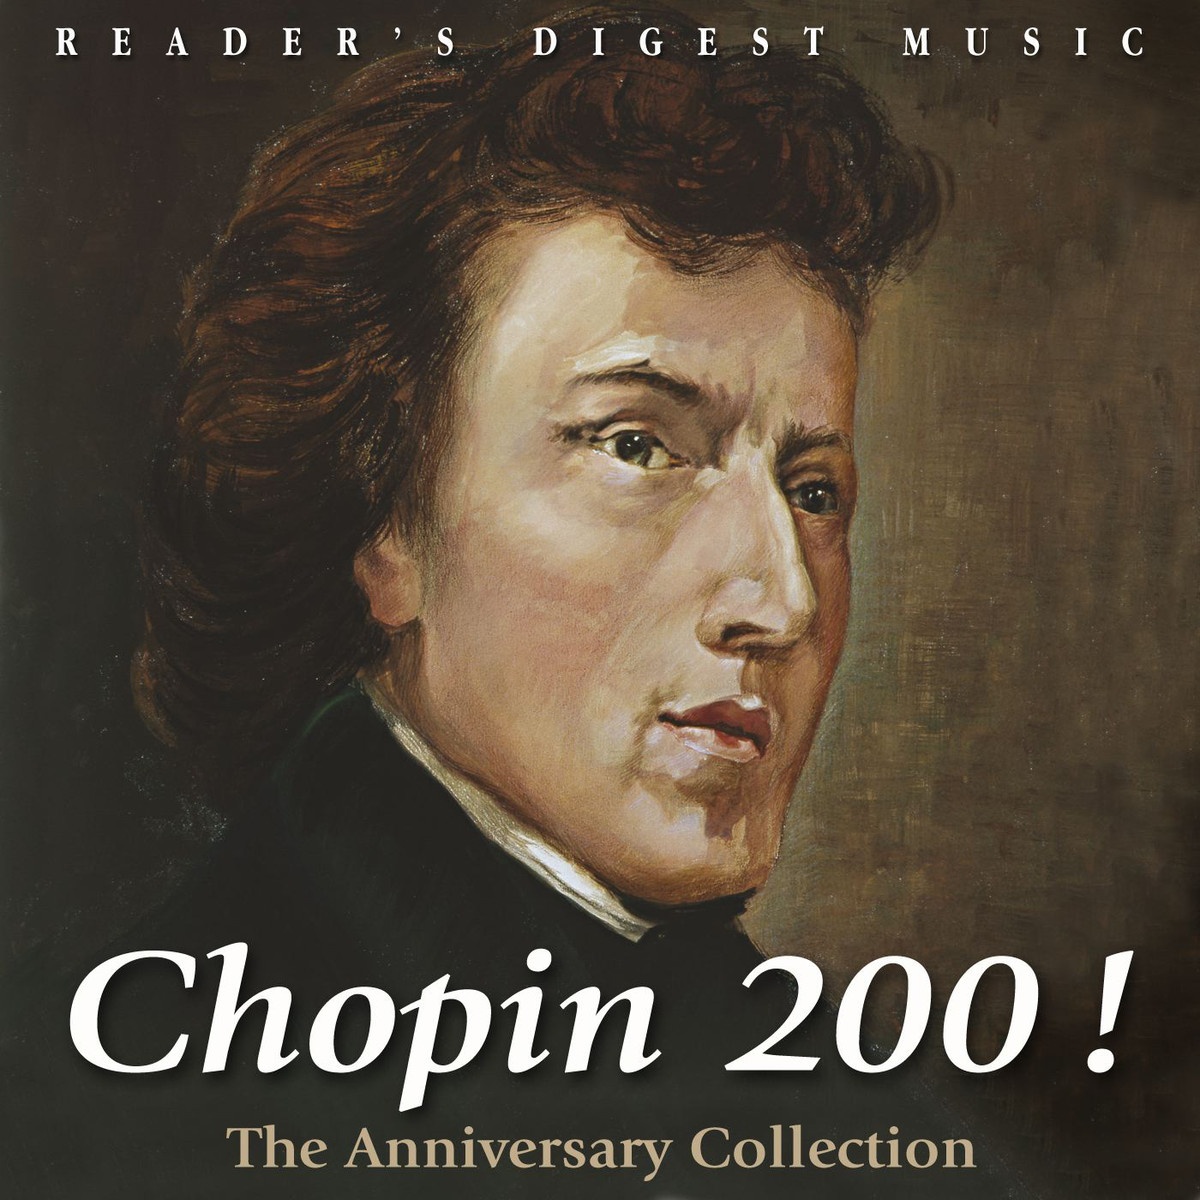 Chopin 200 ! - The Anniversary Collection